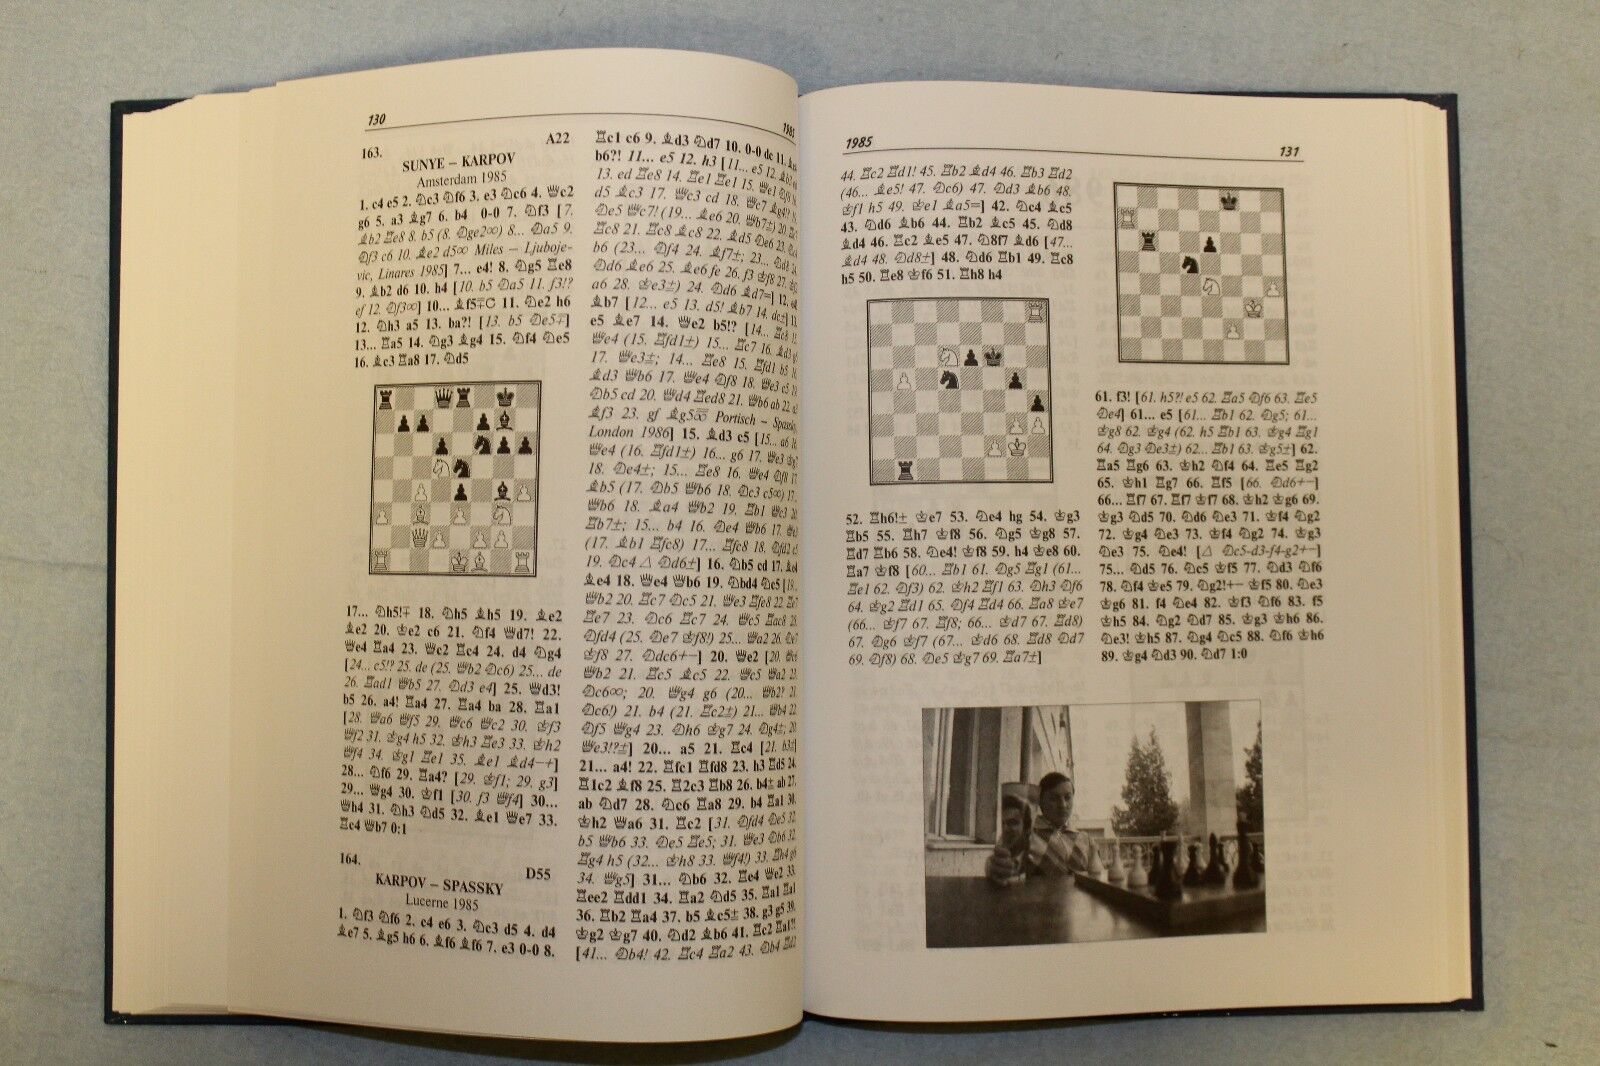 11054.Chess Book: Anatoly Karpov. My 300 Best Games. 1997. Commented by A.Karpov